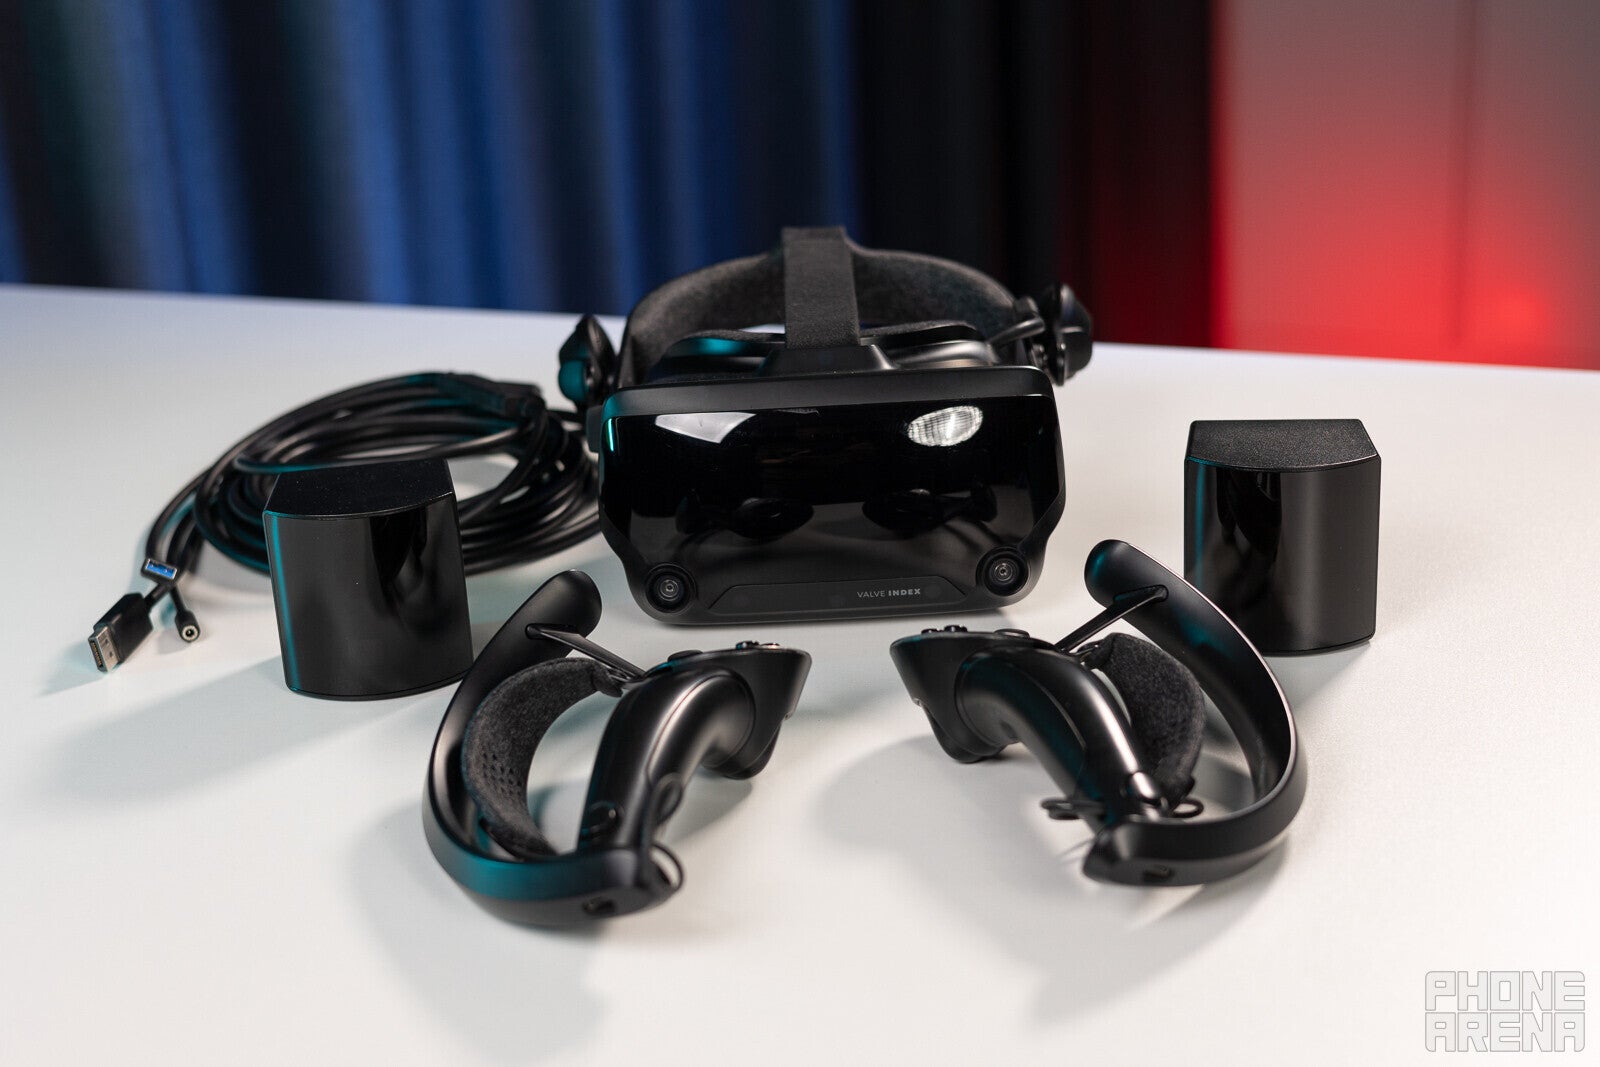 The Valve Index requires plenty of free outlets and involves lots of cables, tracking devices - Opinion: The Quest 2 made all current VR headsets obsolete! Apple, Valve, HTC all follow the king; great news for us!